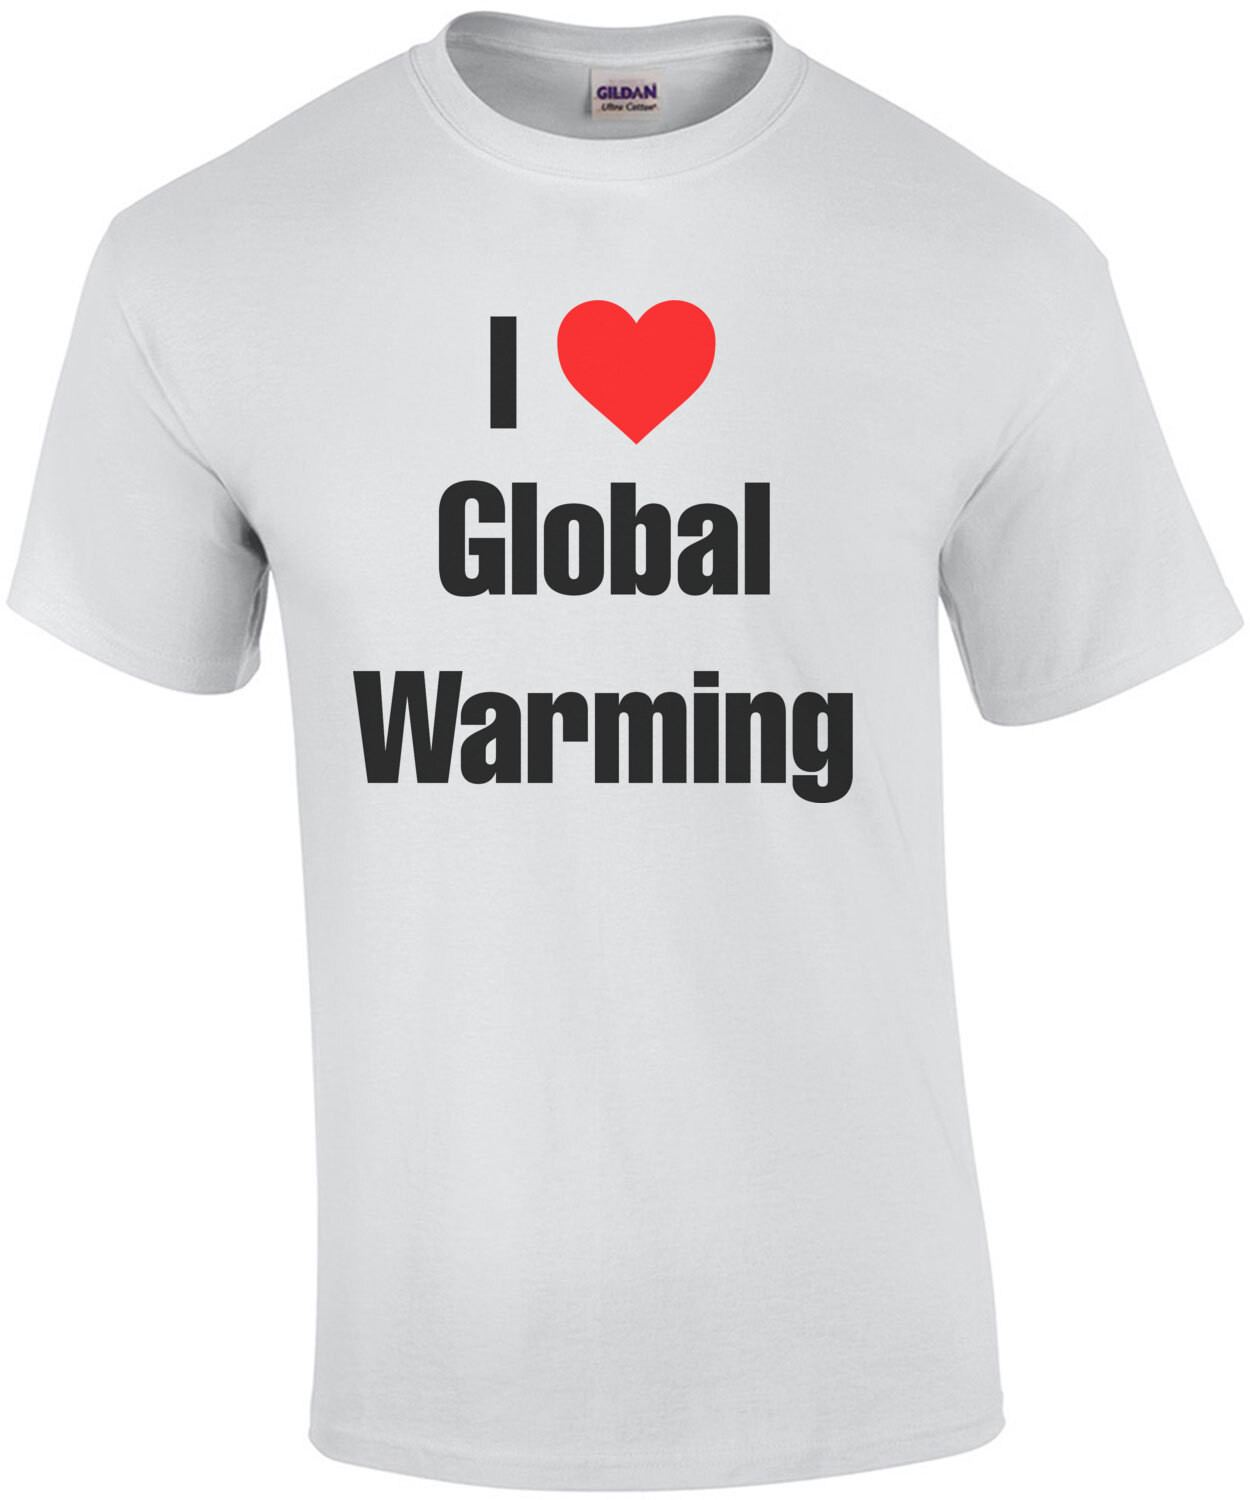 I Love Global Warming Funny Offensive Shirt